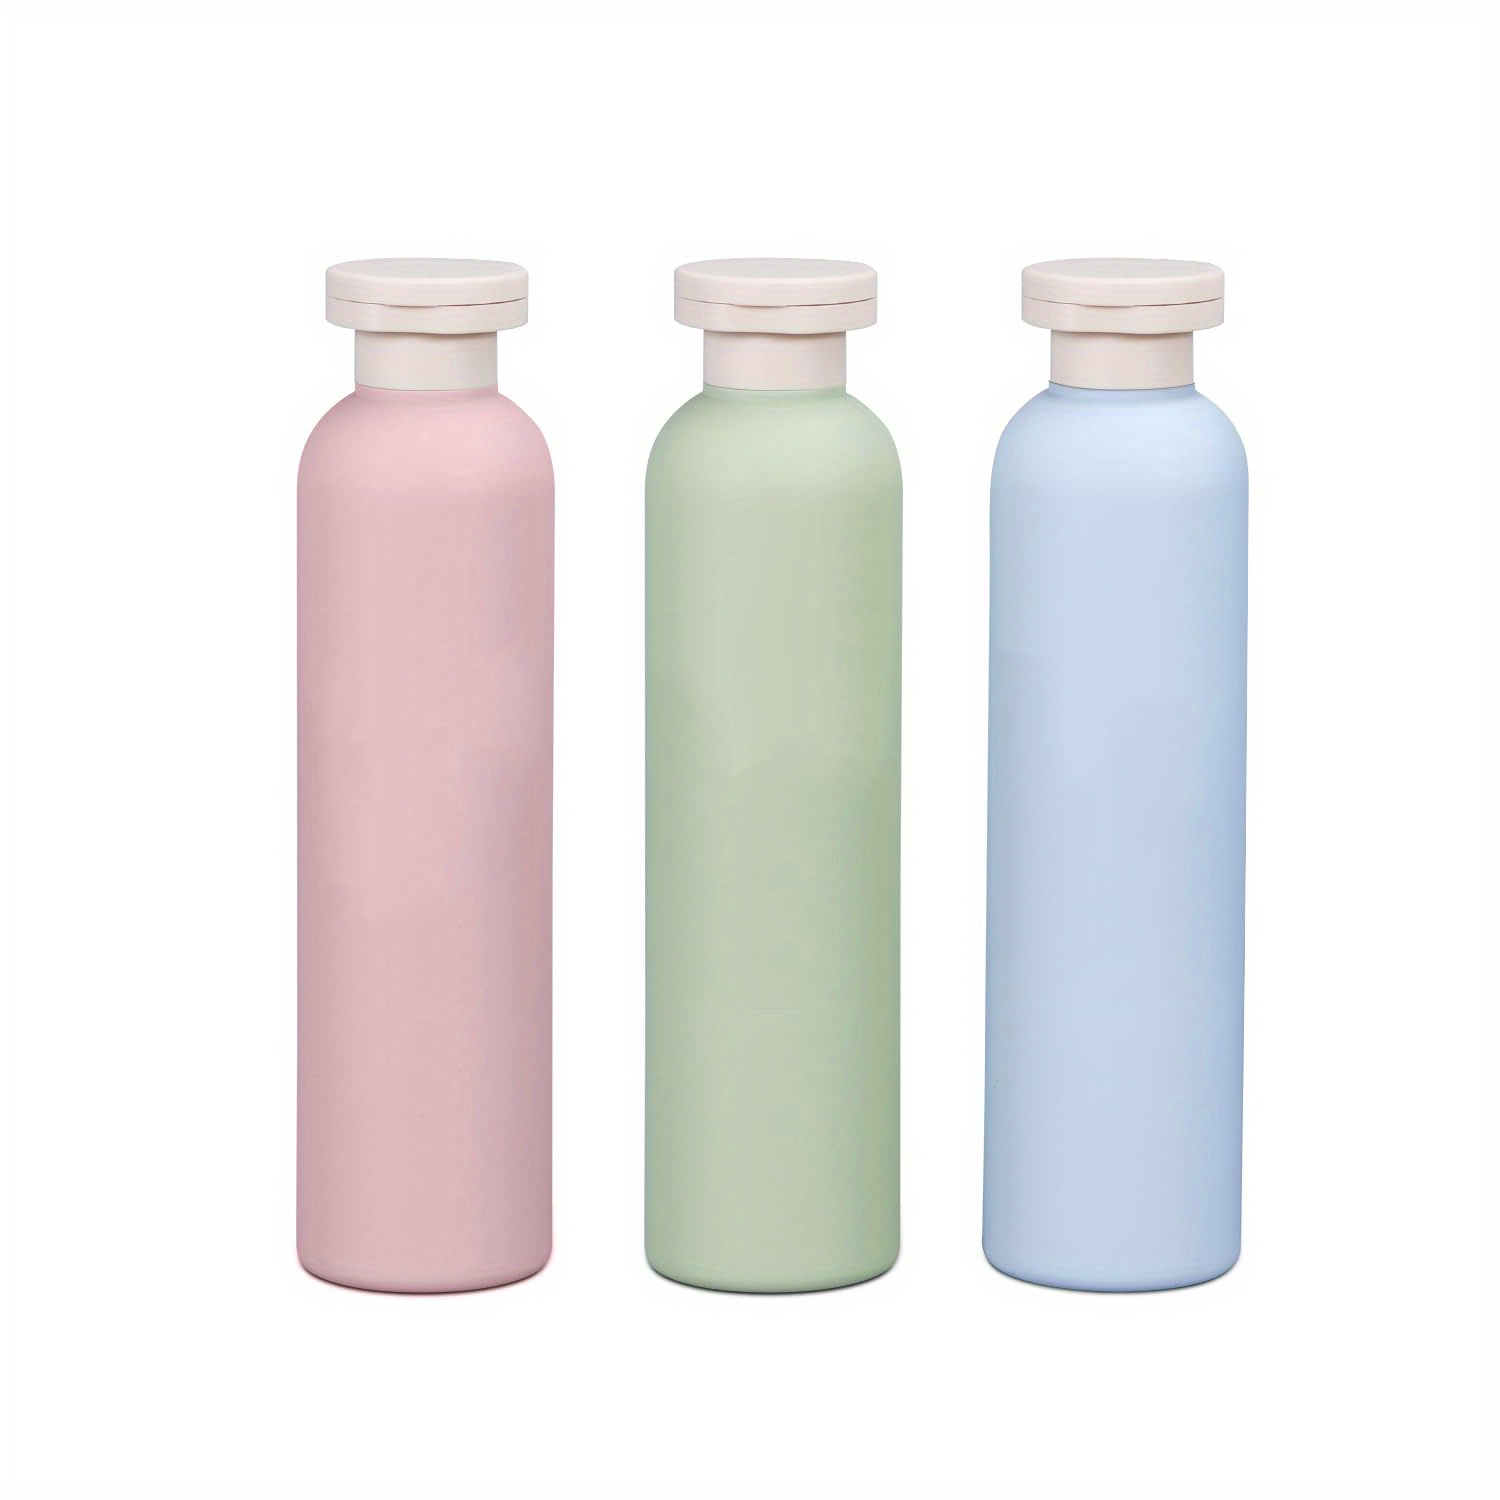 

3-piece Leak-proof Travel Bottles For Shampoo, Lotion & Cream - 200/260ml Refillable Squeeze Containers With Flip Cap